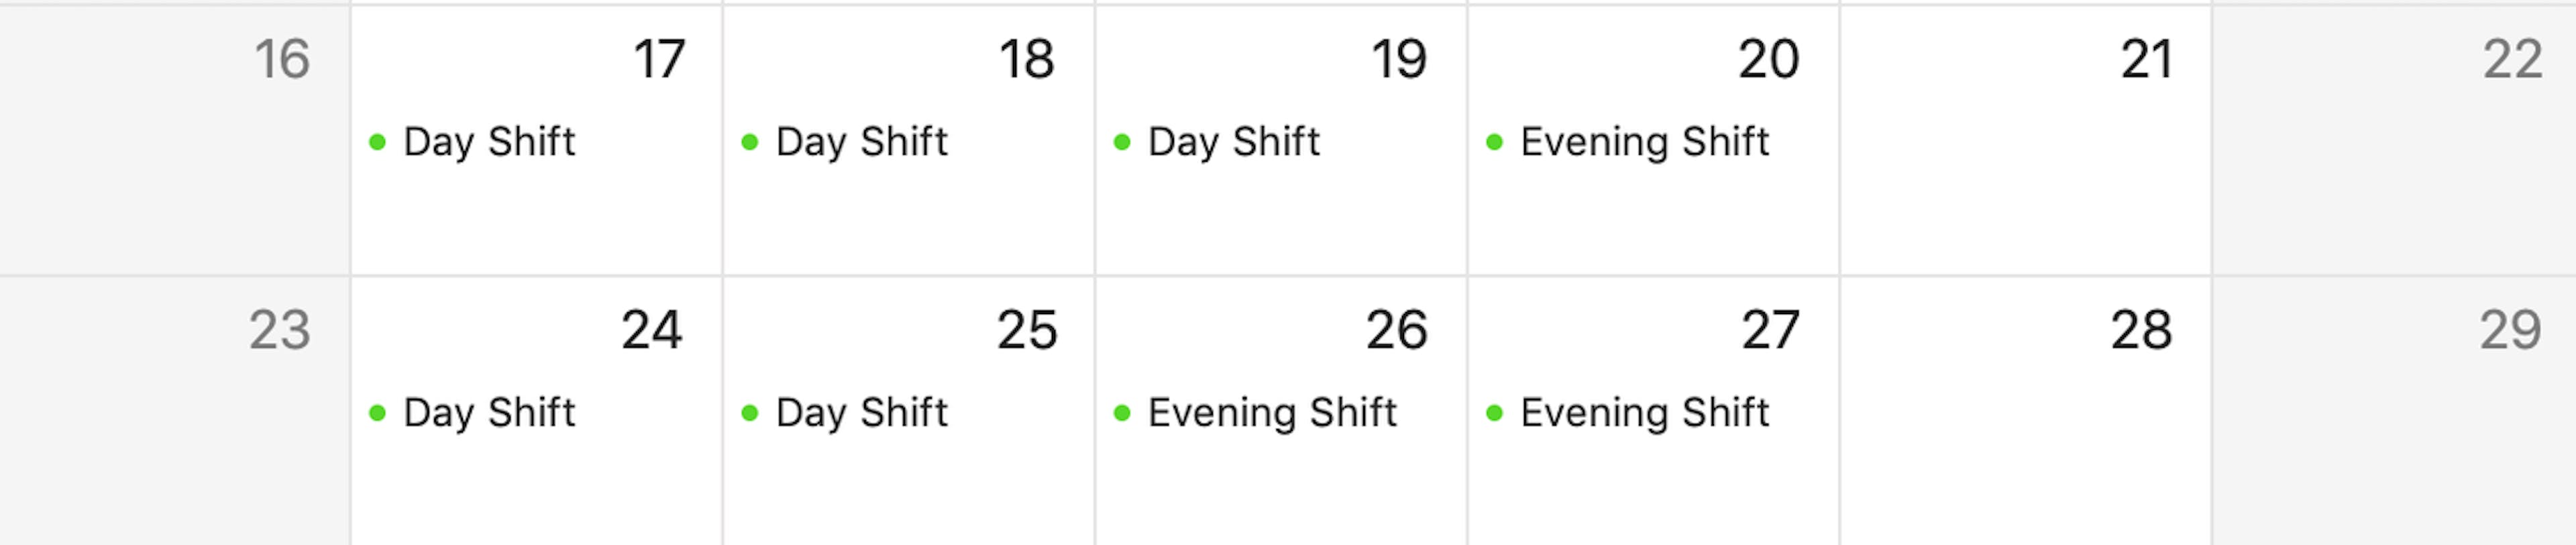 Apple Calendar showing a variety of day/evening shifts interspersed